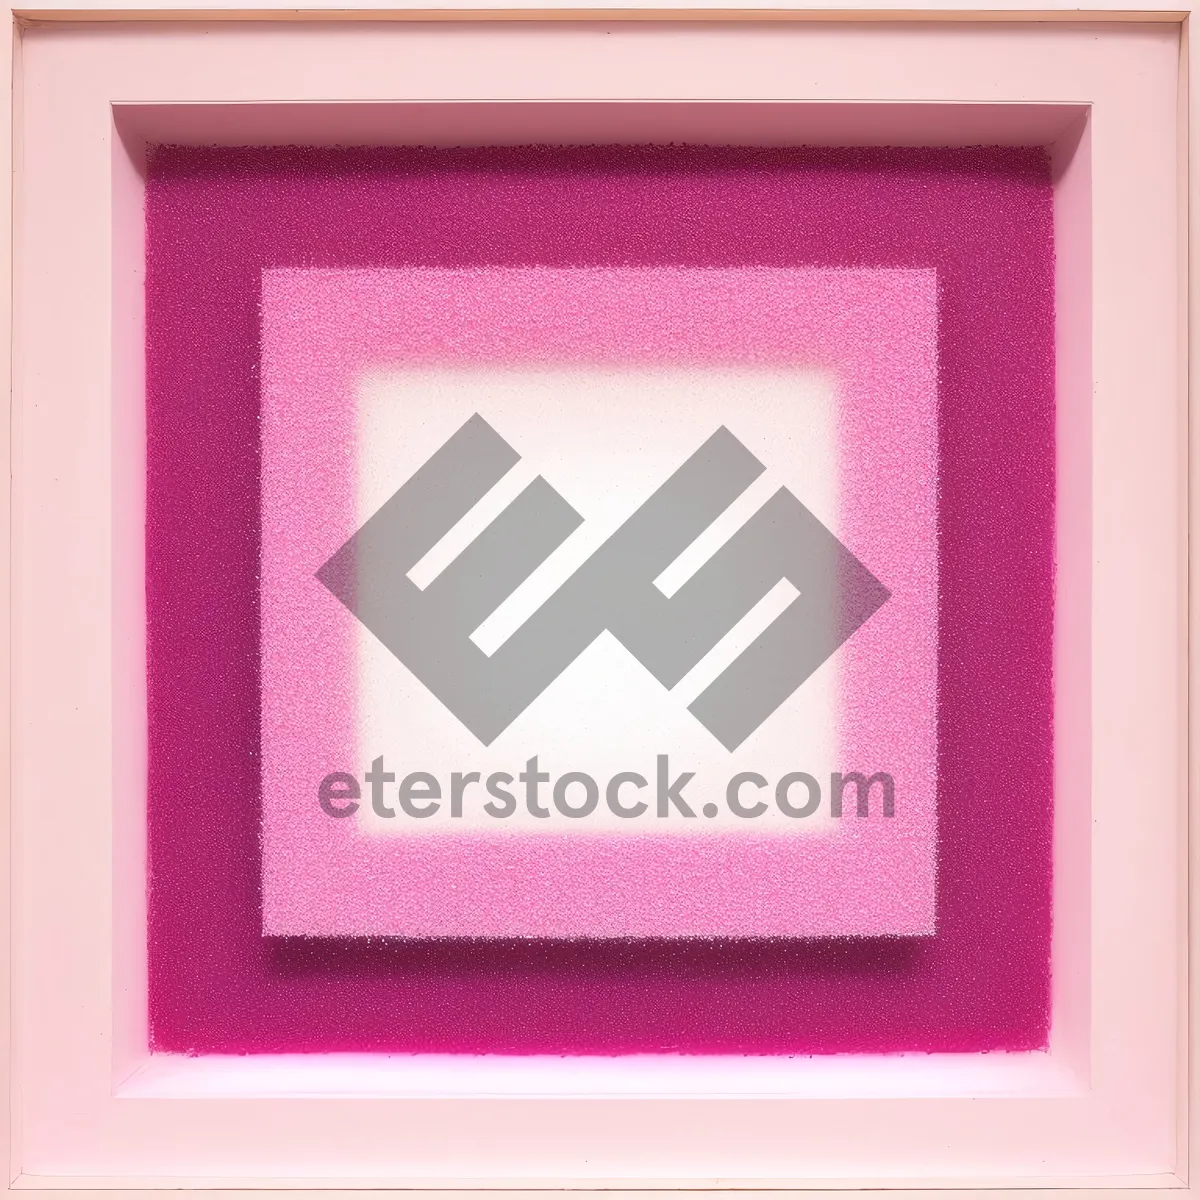 Picture of Vintage Wooden Frame with Decorative Grunge Border